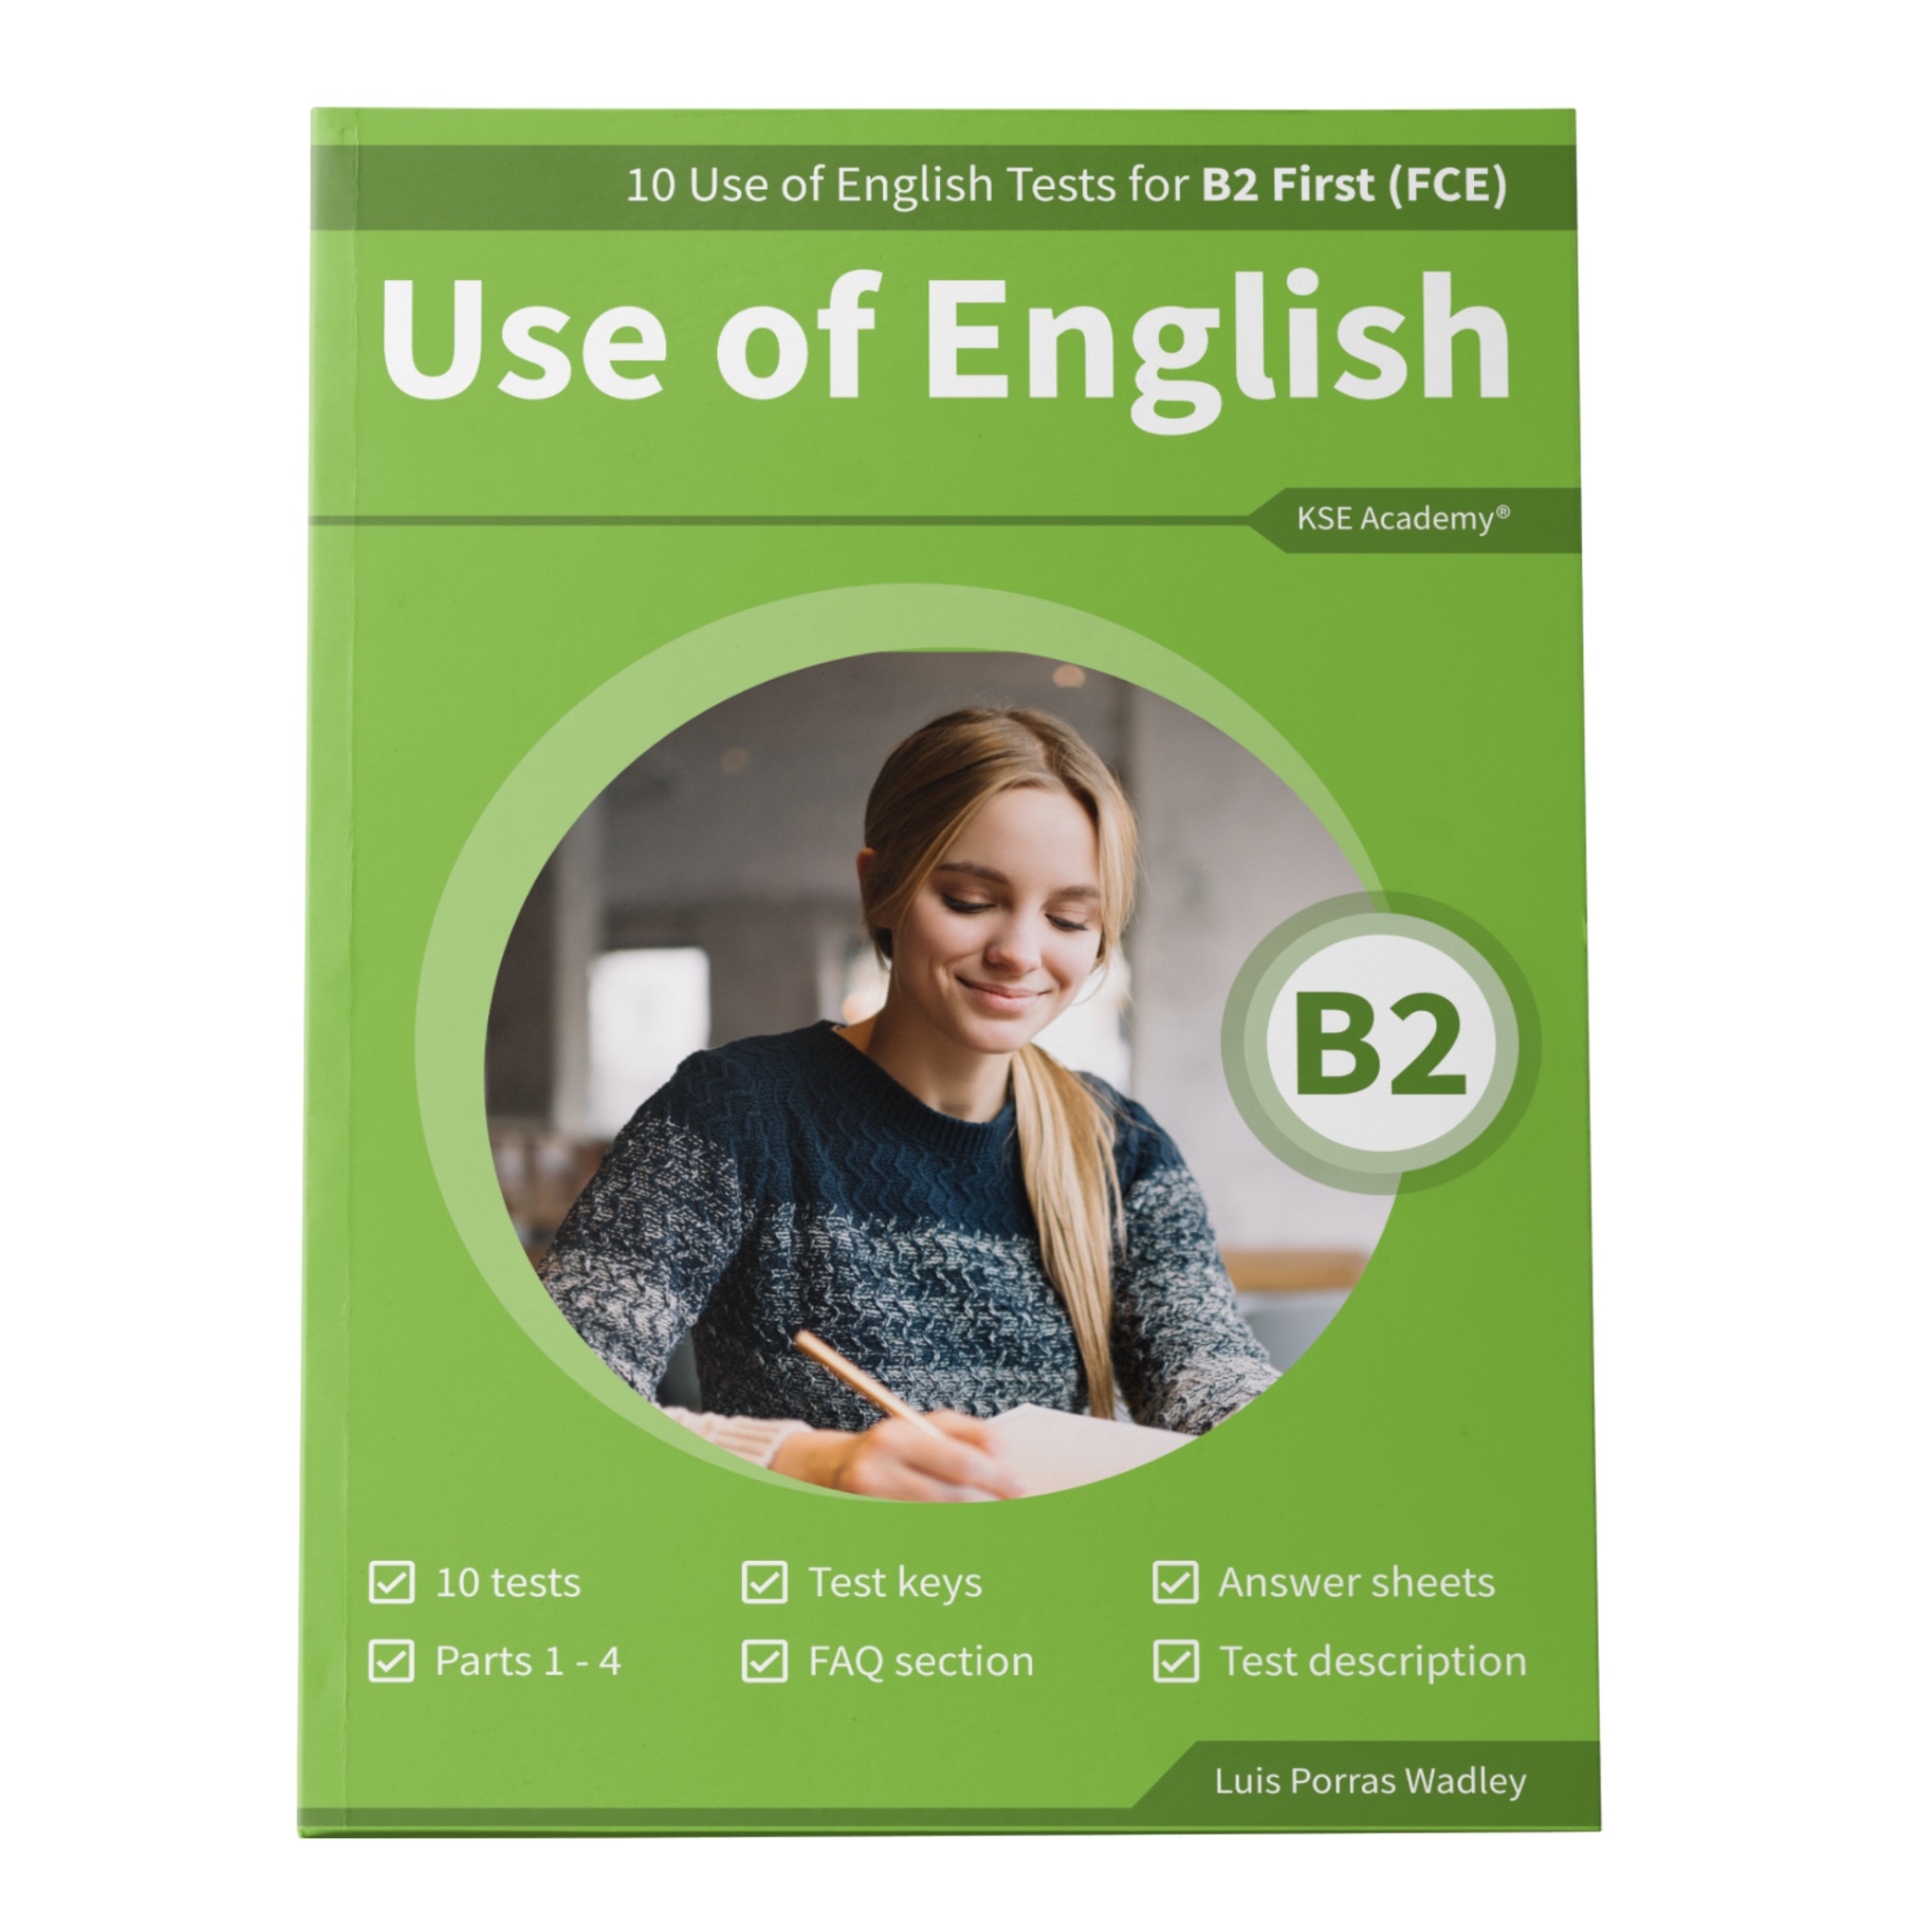 Use of English B2: 10 Use of English Tests for B2 First (FCE)